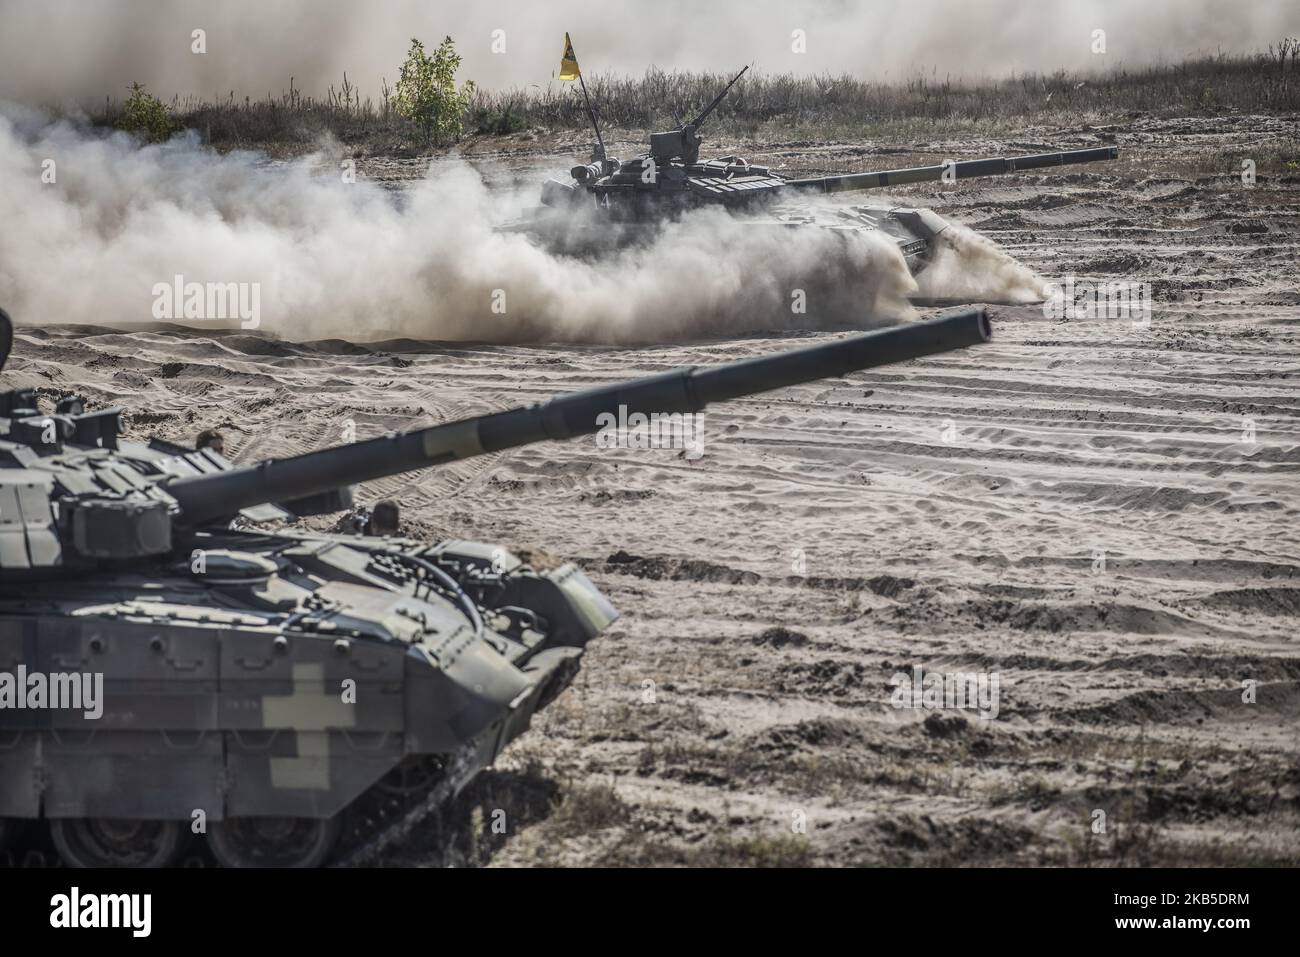 The tactical training for the tank forces of the Ukrainian Army performs at the proving grounds in Honcharivske, Chernihiv Oblast, Ukraine, on September 7, 2019. During the technical demonstration of the tanks, the units were firing with live ammunition and showed the practical use of the anti-tank missiles. Based on the training results, the best tank units were awarded the trophies and the diplomas. (Photo by Oleksandr Rupeta/NurPhoto) Stock Photo